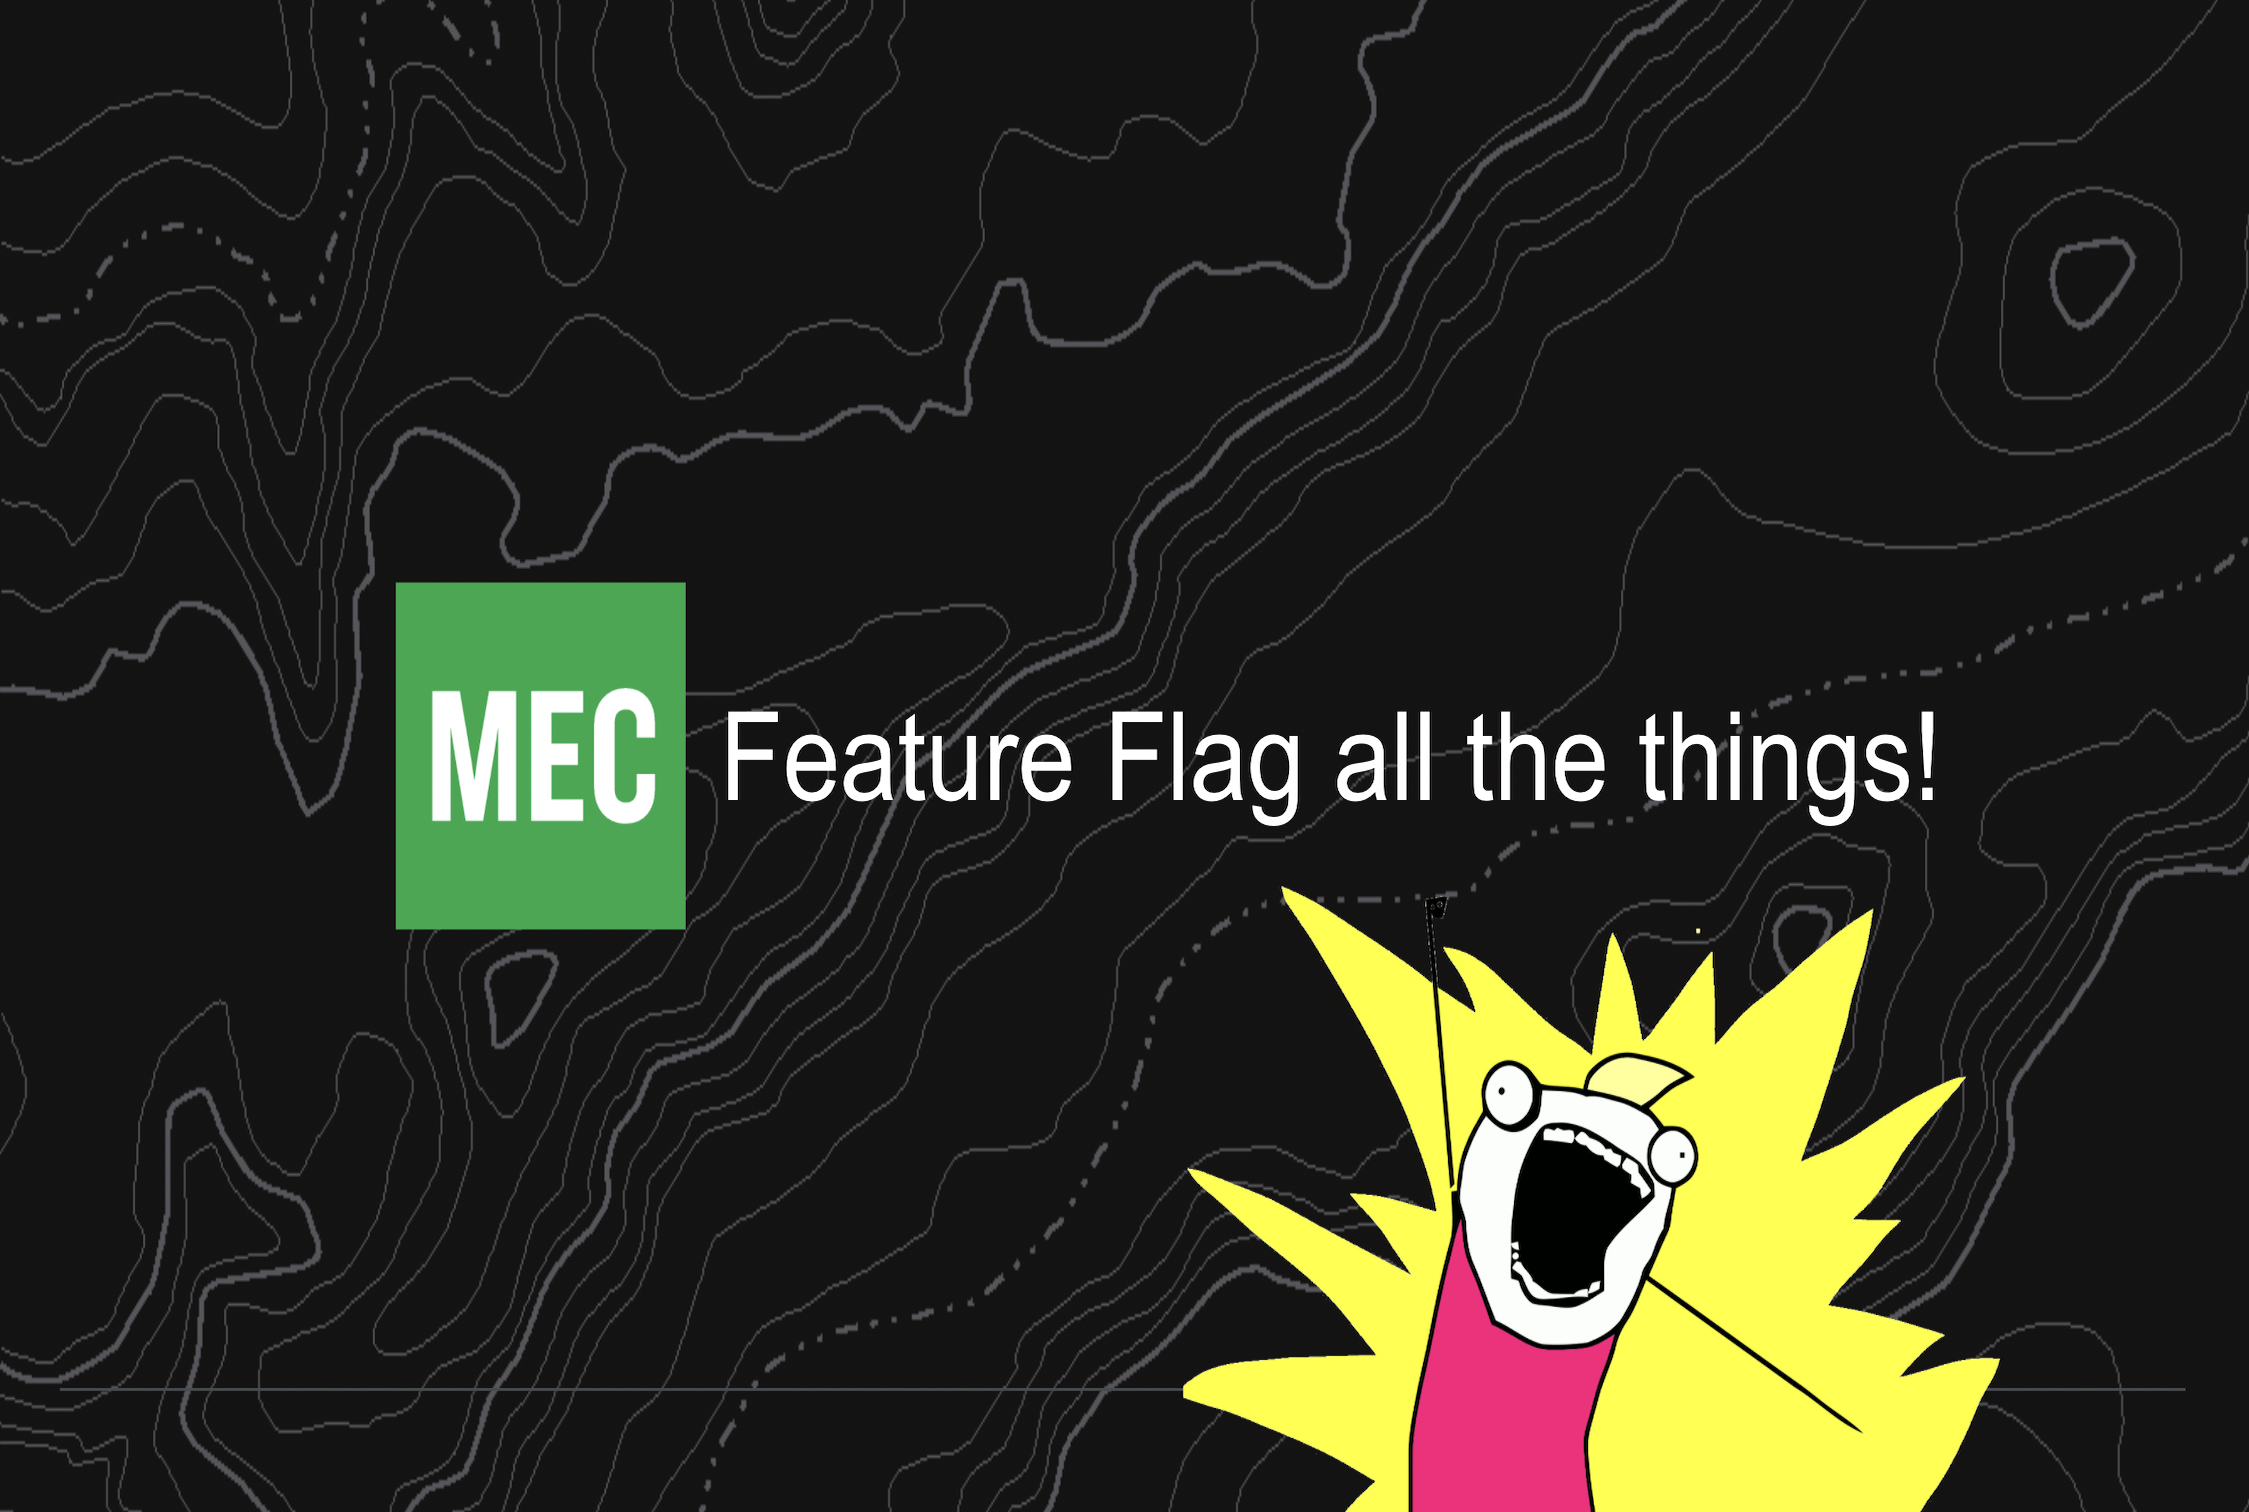 MEC: Feature flag all the things